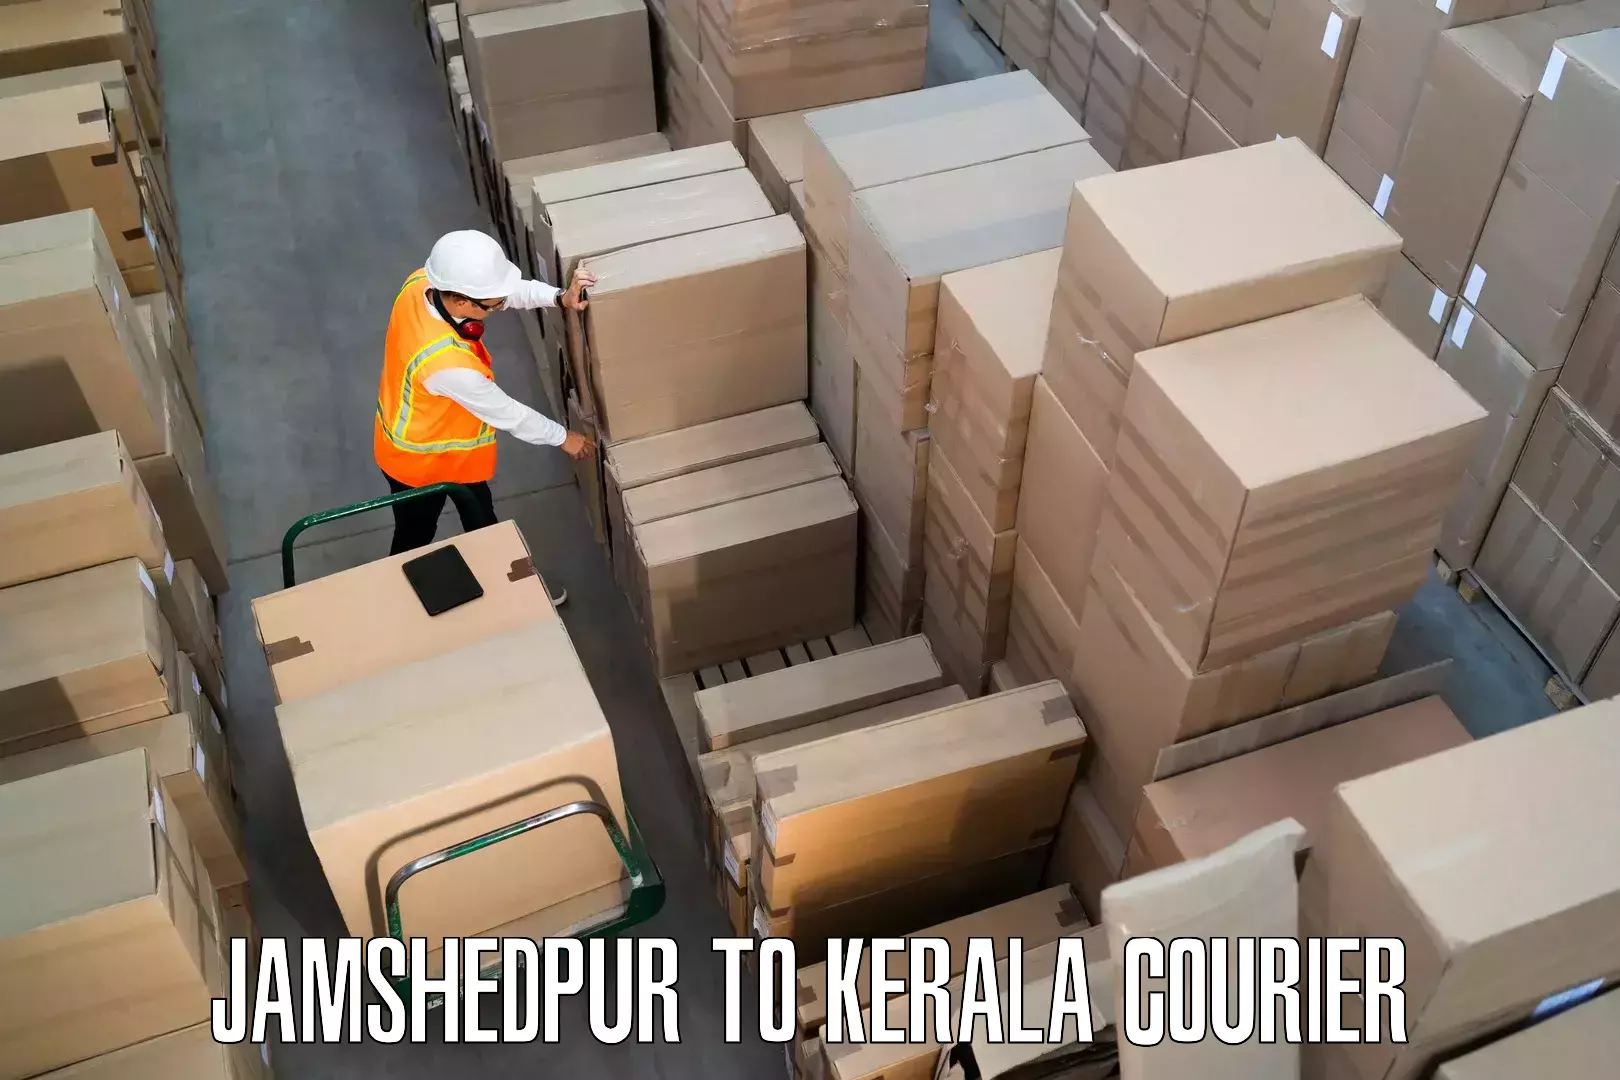 Trusted relocation experts Jamshedpur to Allepey